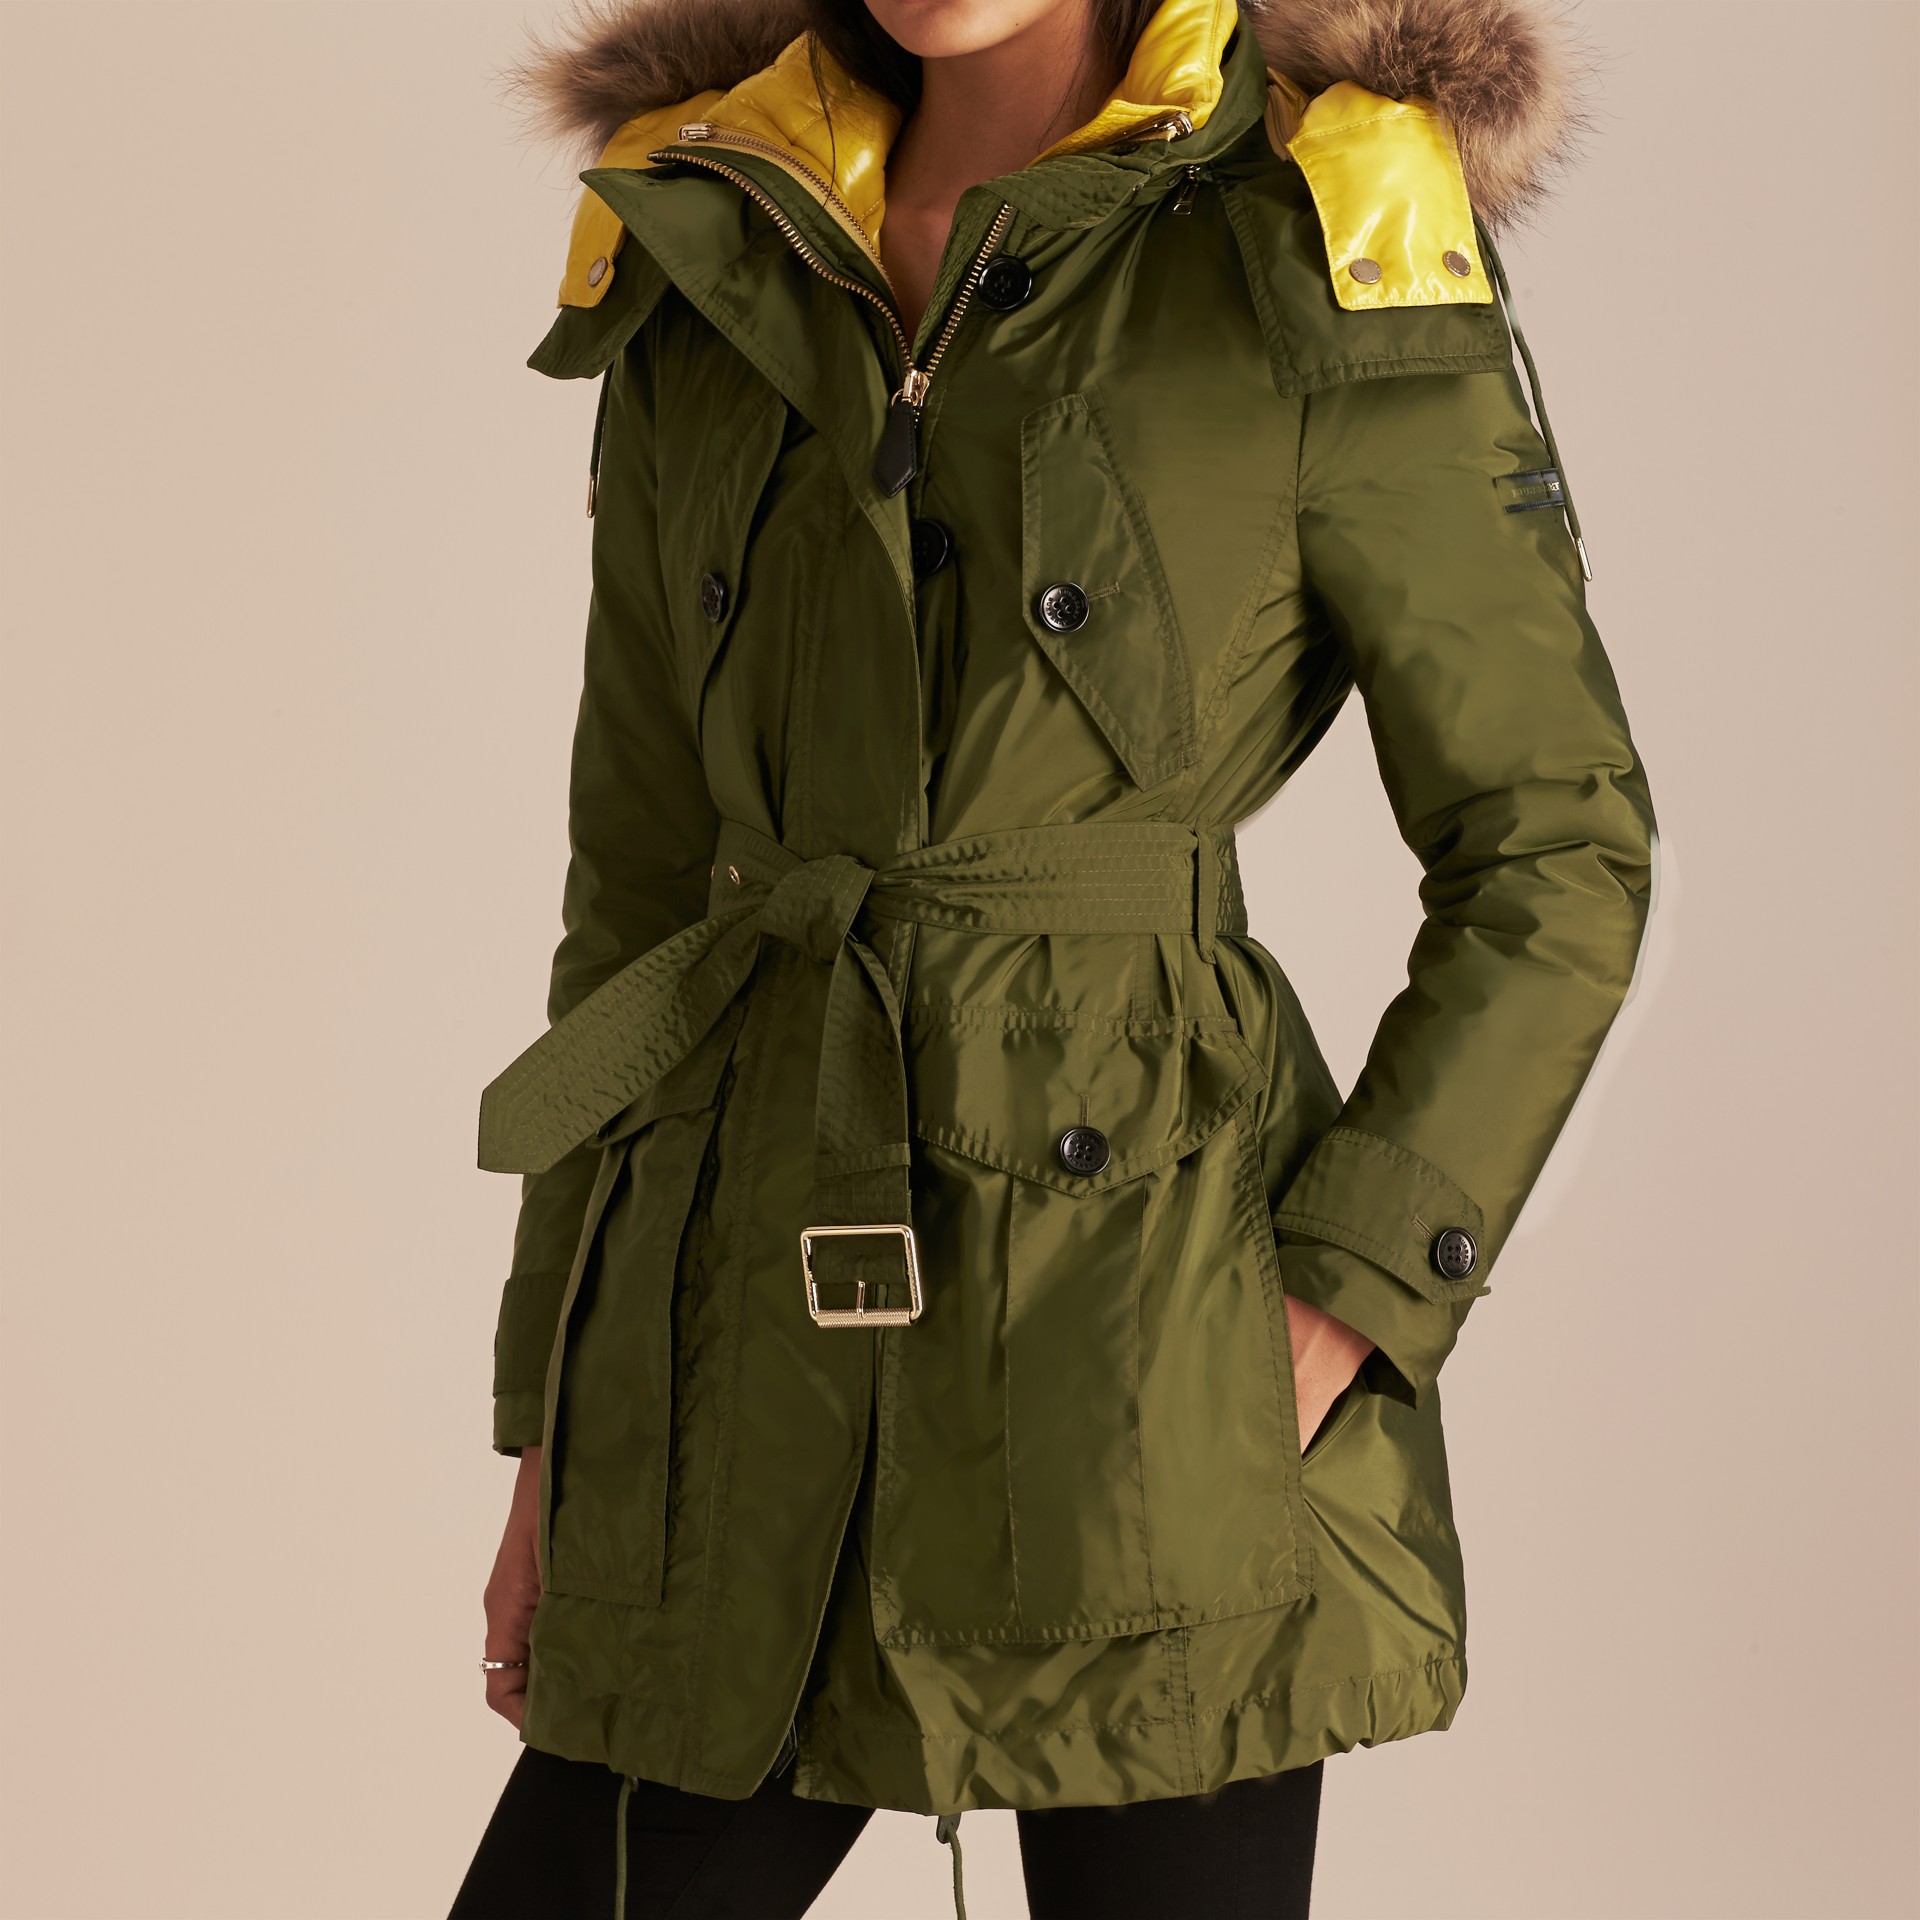 Fur-trimmed Parka with Detachable Down-filled Jacket Bright Moss Green ...